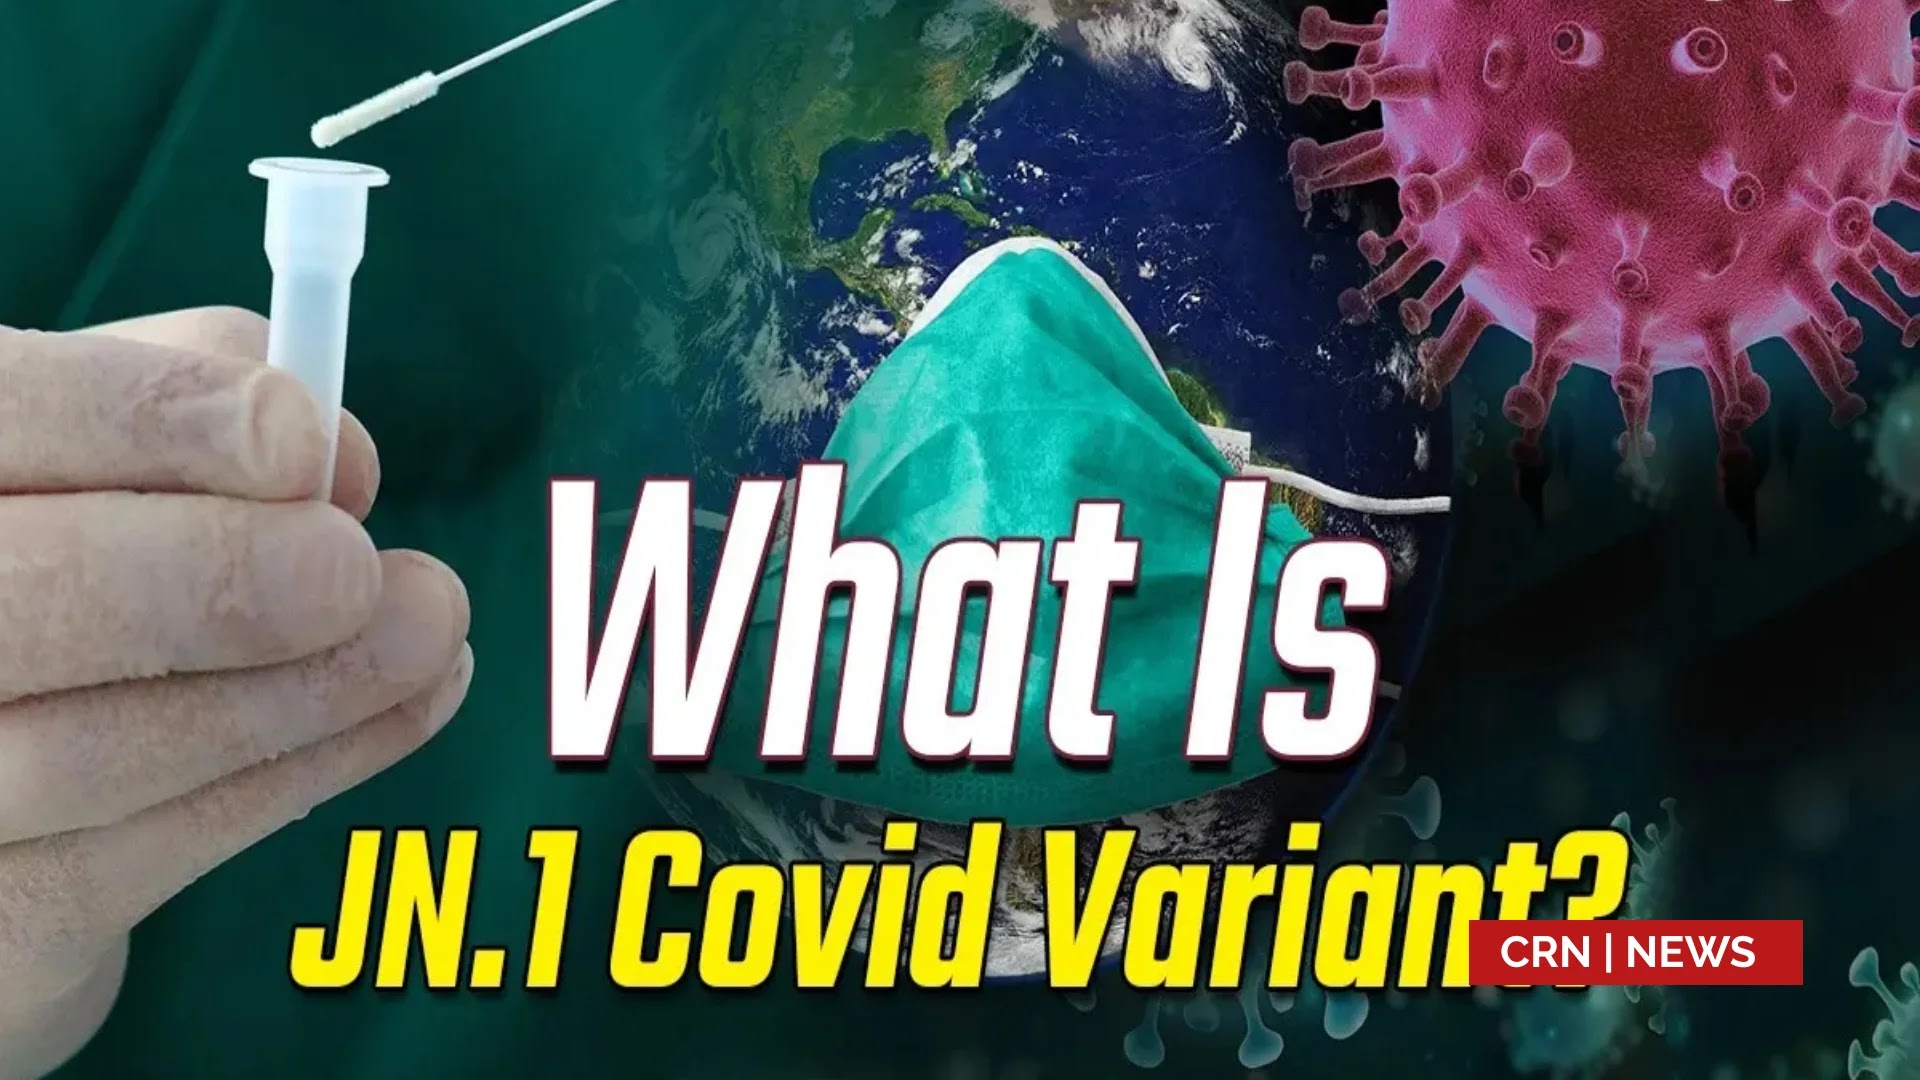 New COVID variant JN.1 now comprises up to 30% of US cases CDC